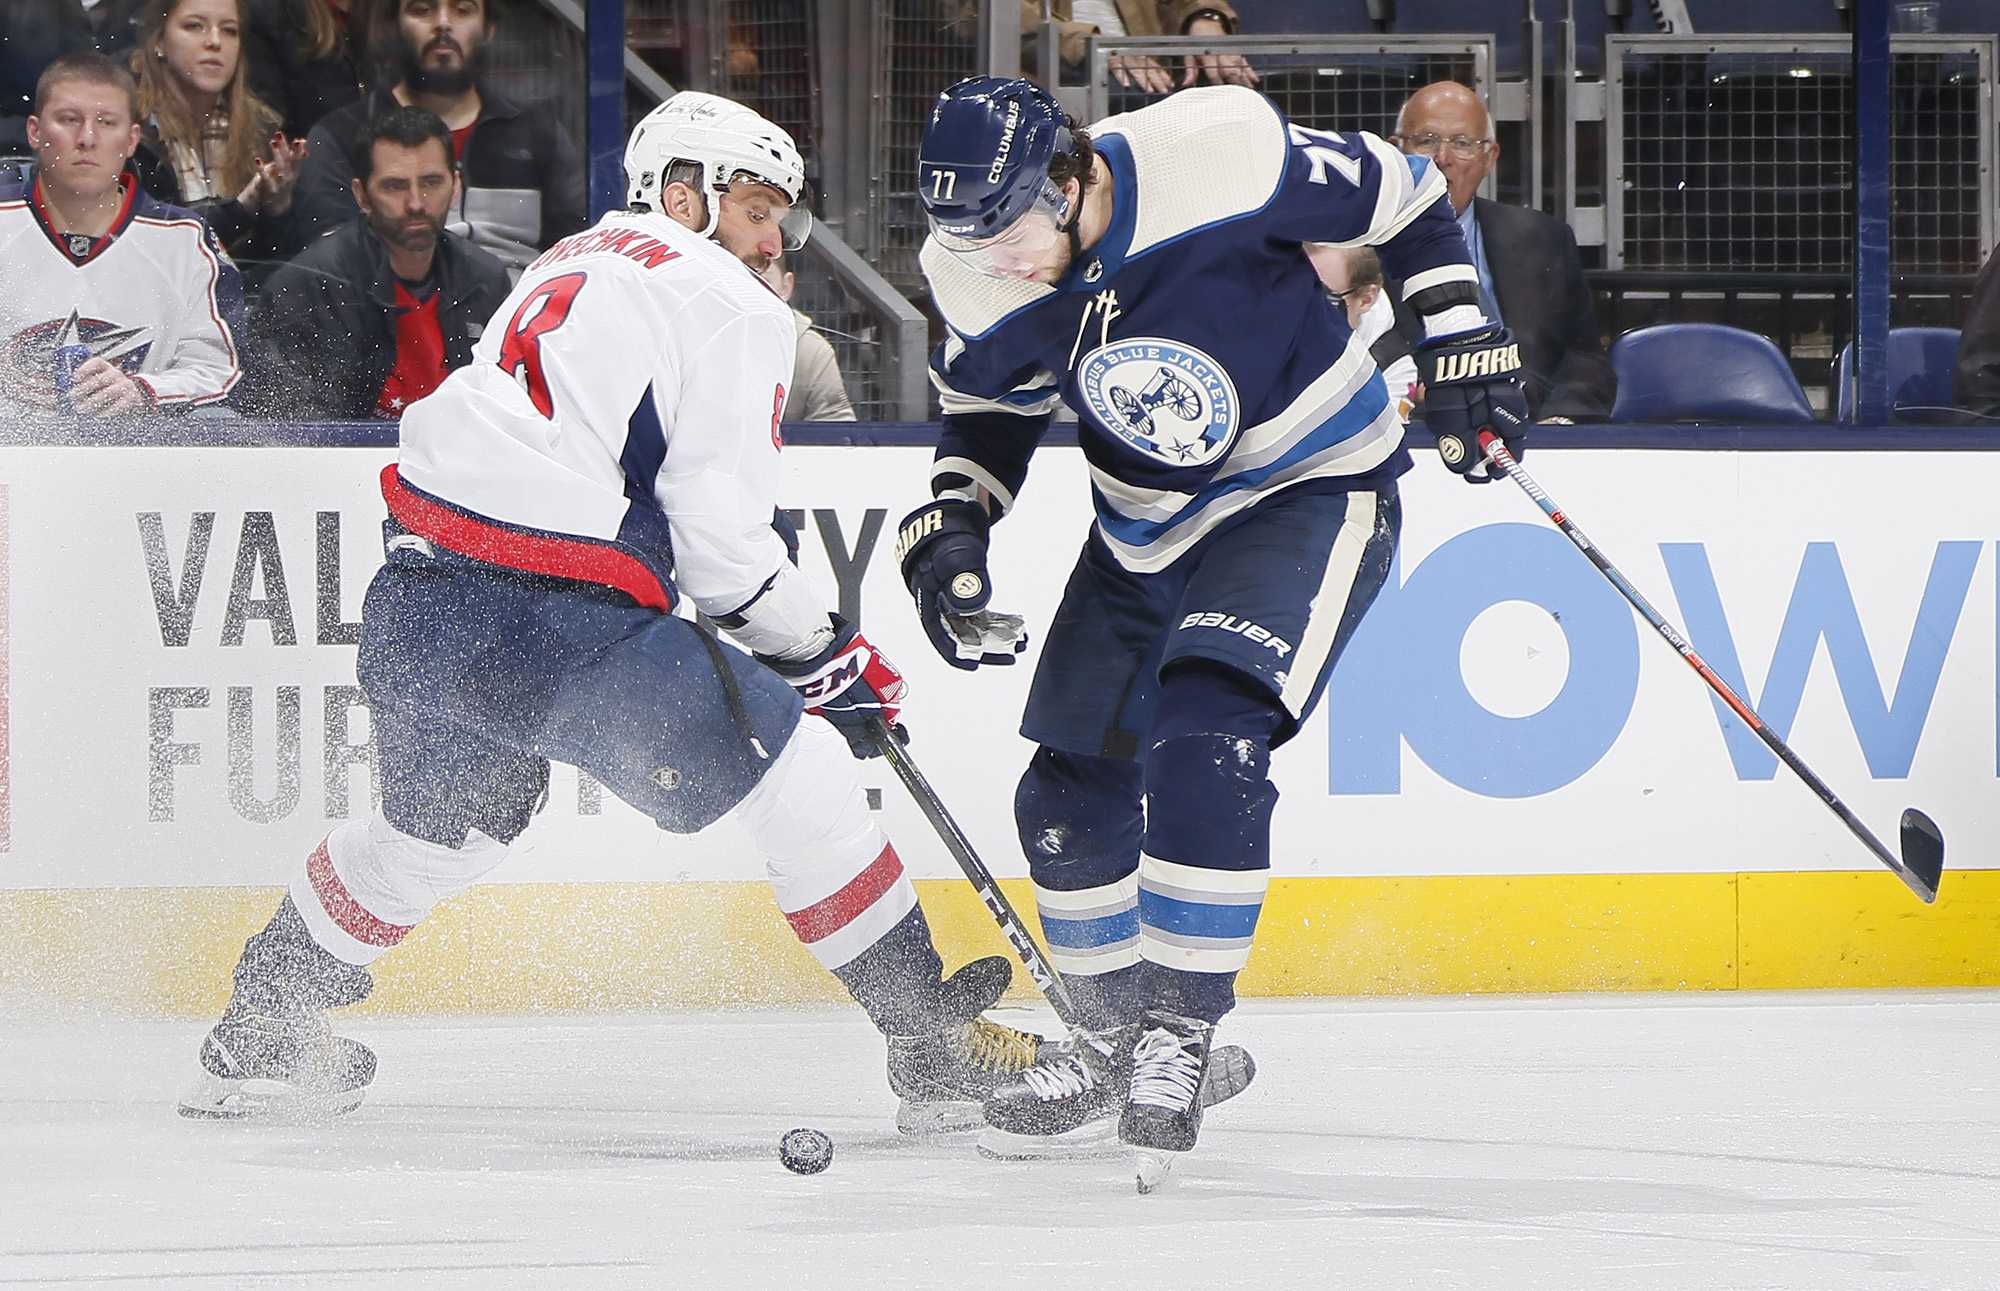 Columbus Blue Jackets right wing Josh Anderson (77) skates around Washington Capitals left wing Alex Ovechkin (8) during the third period on Tuesday, Feb. 12, 2019 of at Nationwide Arena in Columbus, Ohio. (Adam Cairns/Columbus Dispatch/TNS)